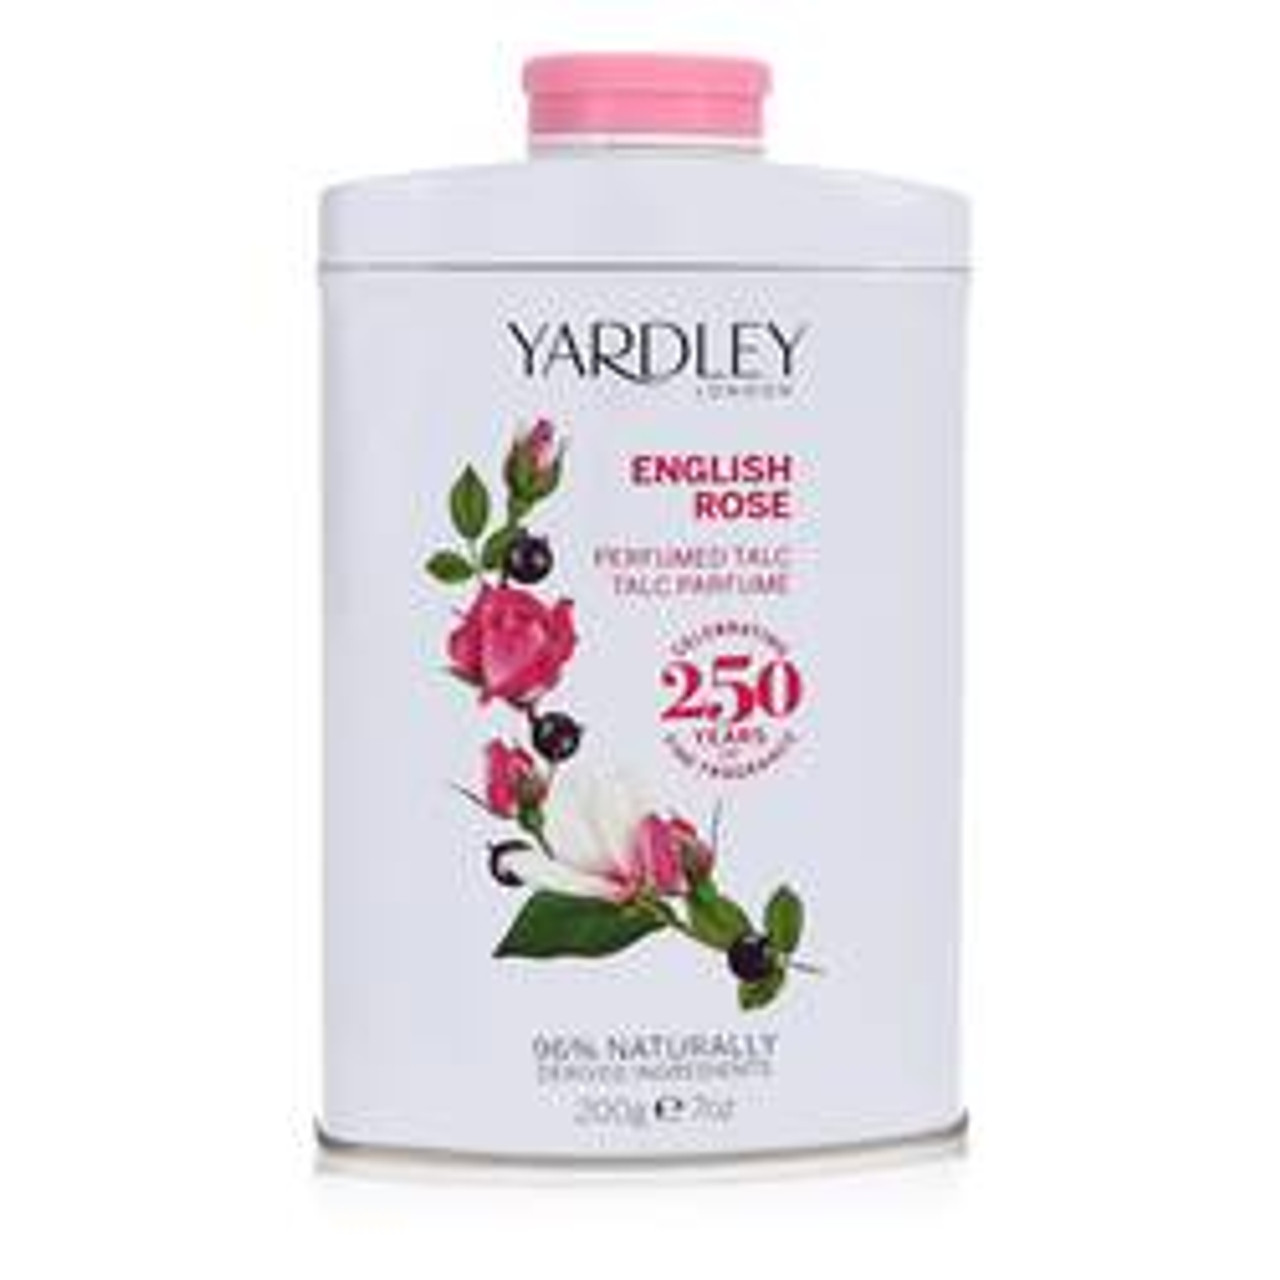 English Rose Yardley Perfume By Yardley London Talc 7 oz for Women - [From 35.00 - Choose pk Qty ] - *Ships from Miami